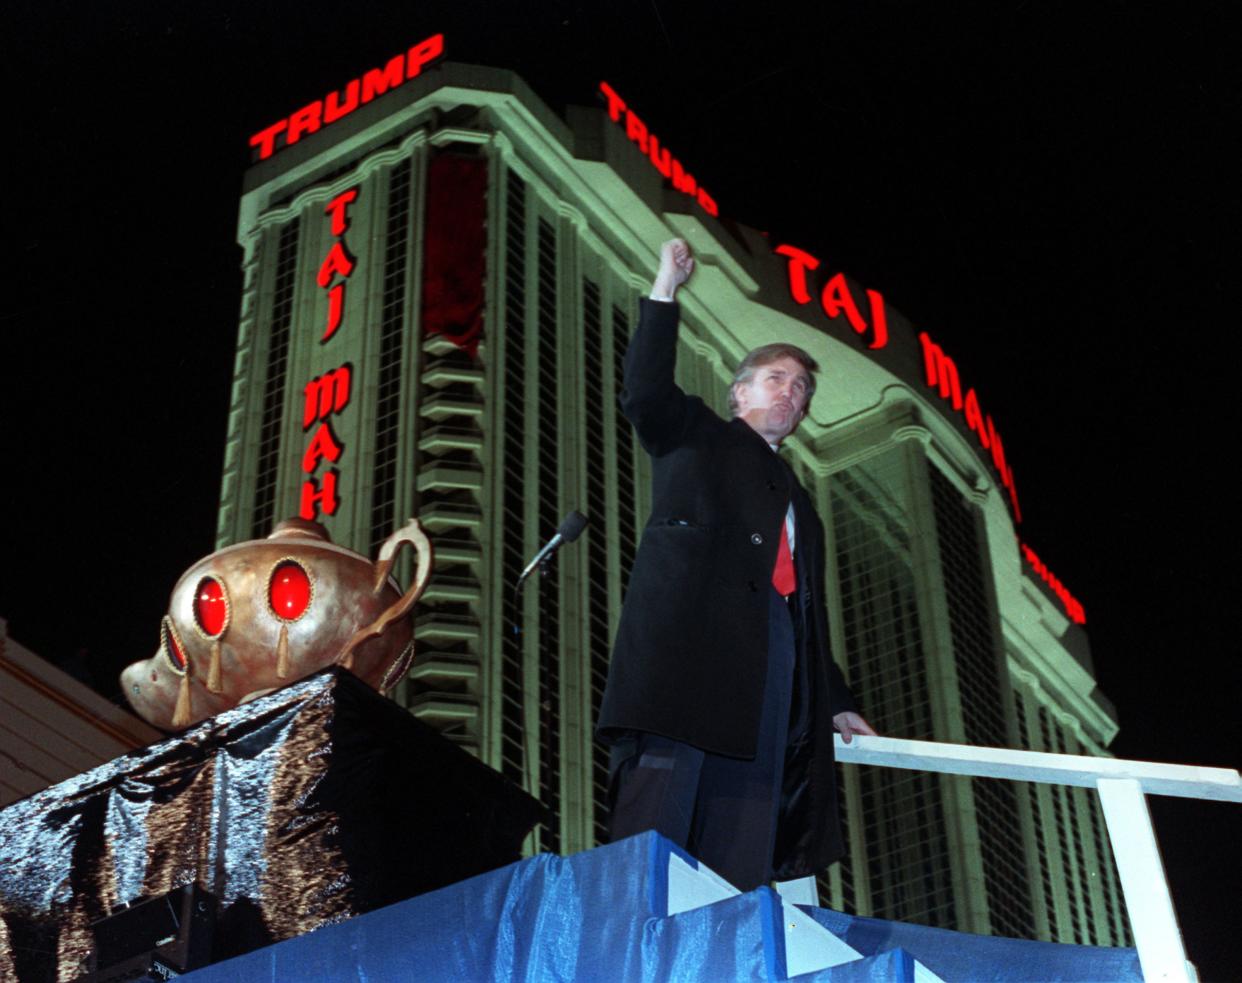 Donald Trump ascends the stairs with his fist raised from the genie's lamp after opening the Trump Taj Mahal Casino Resort in a spectacular show of fireworks and laser lights on Thursday, April 5, 1990, in Atlantic City, N.J.